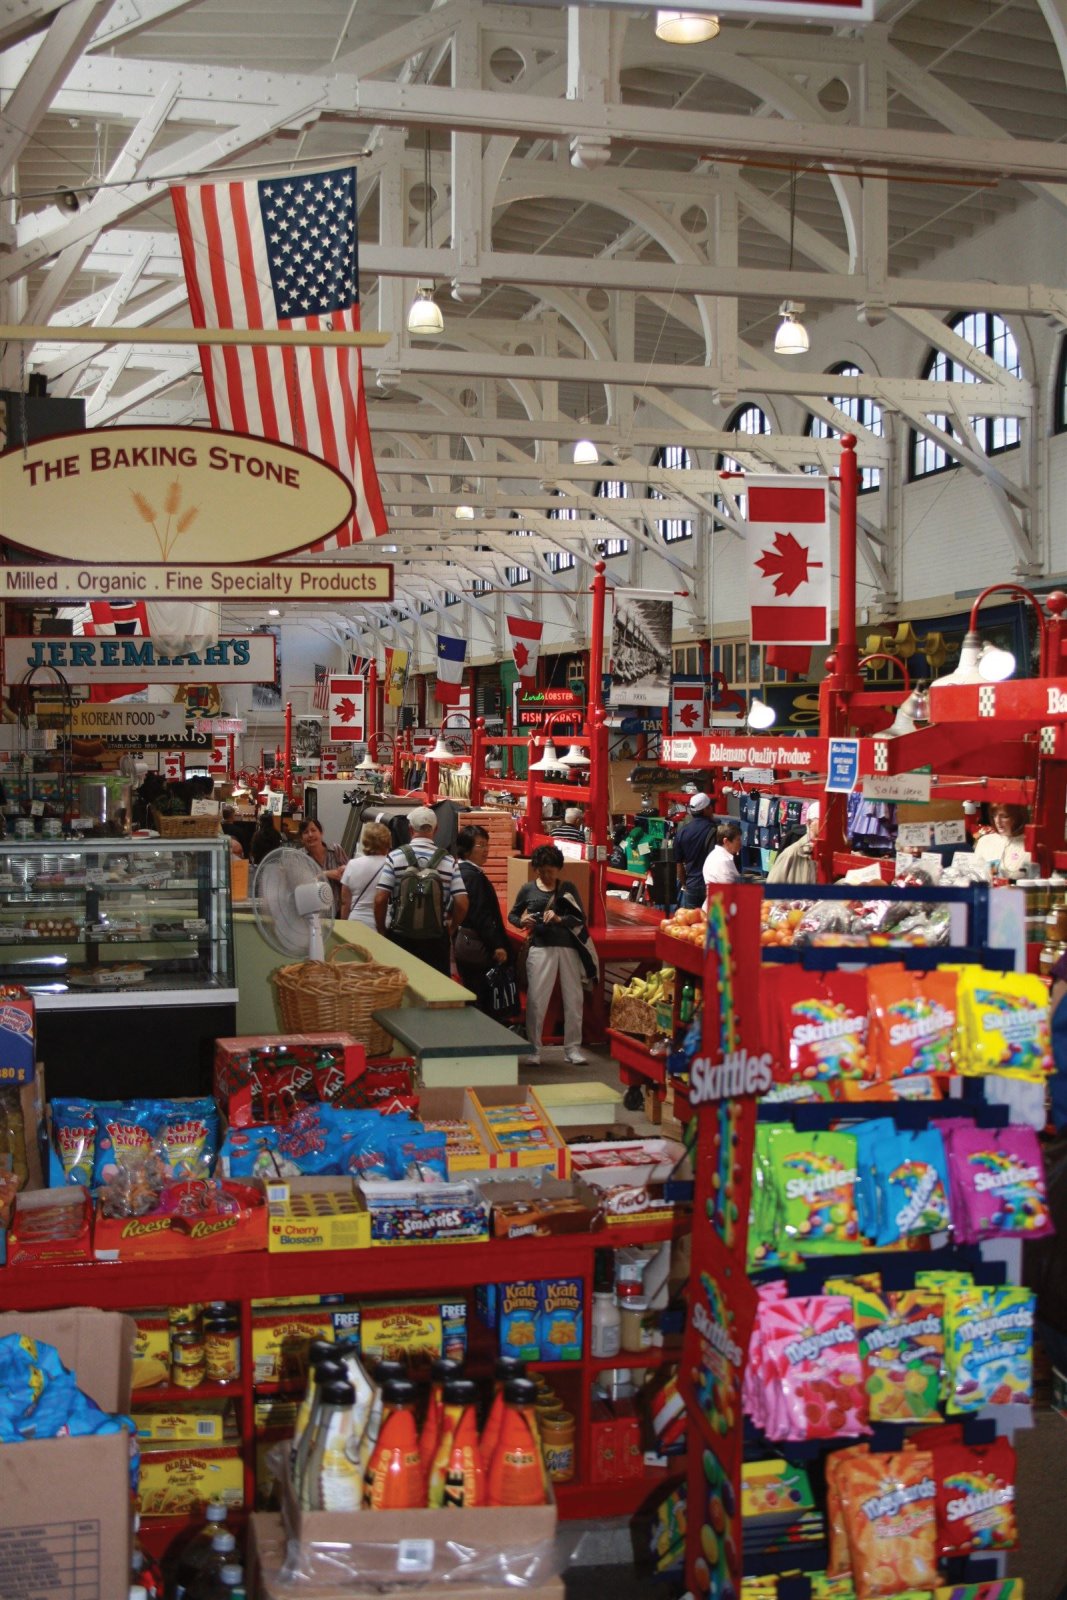 Enjoy the bustling sound, smells of spice and exotic foods of this colorful place, the Saint John City Market!